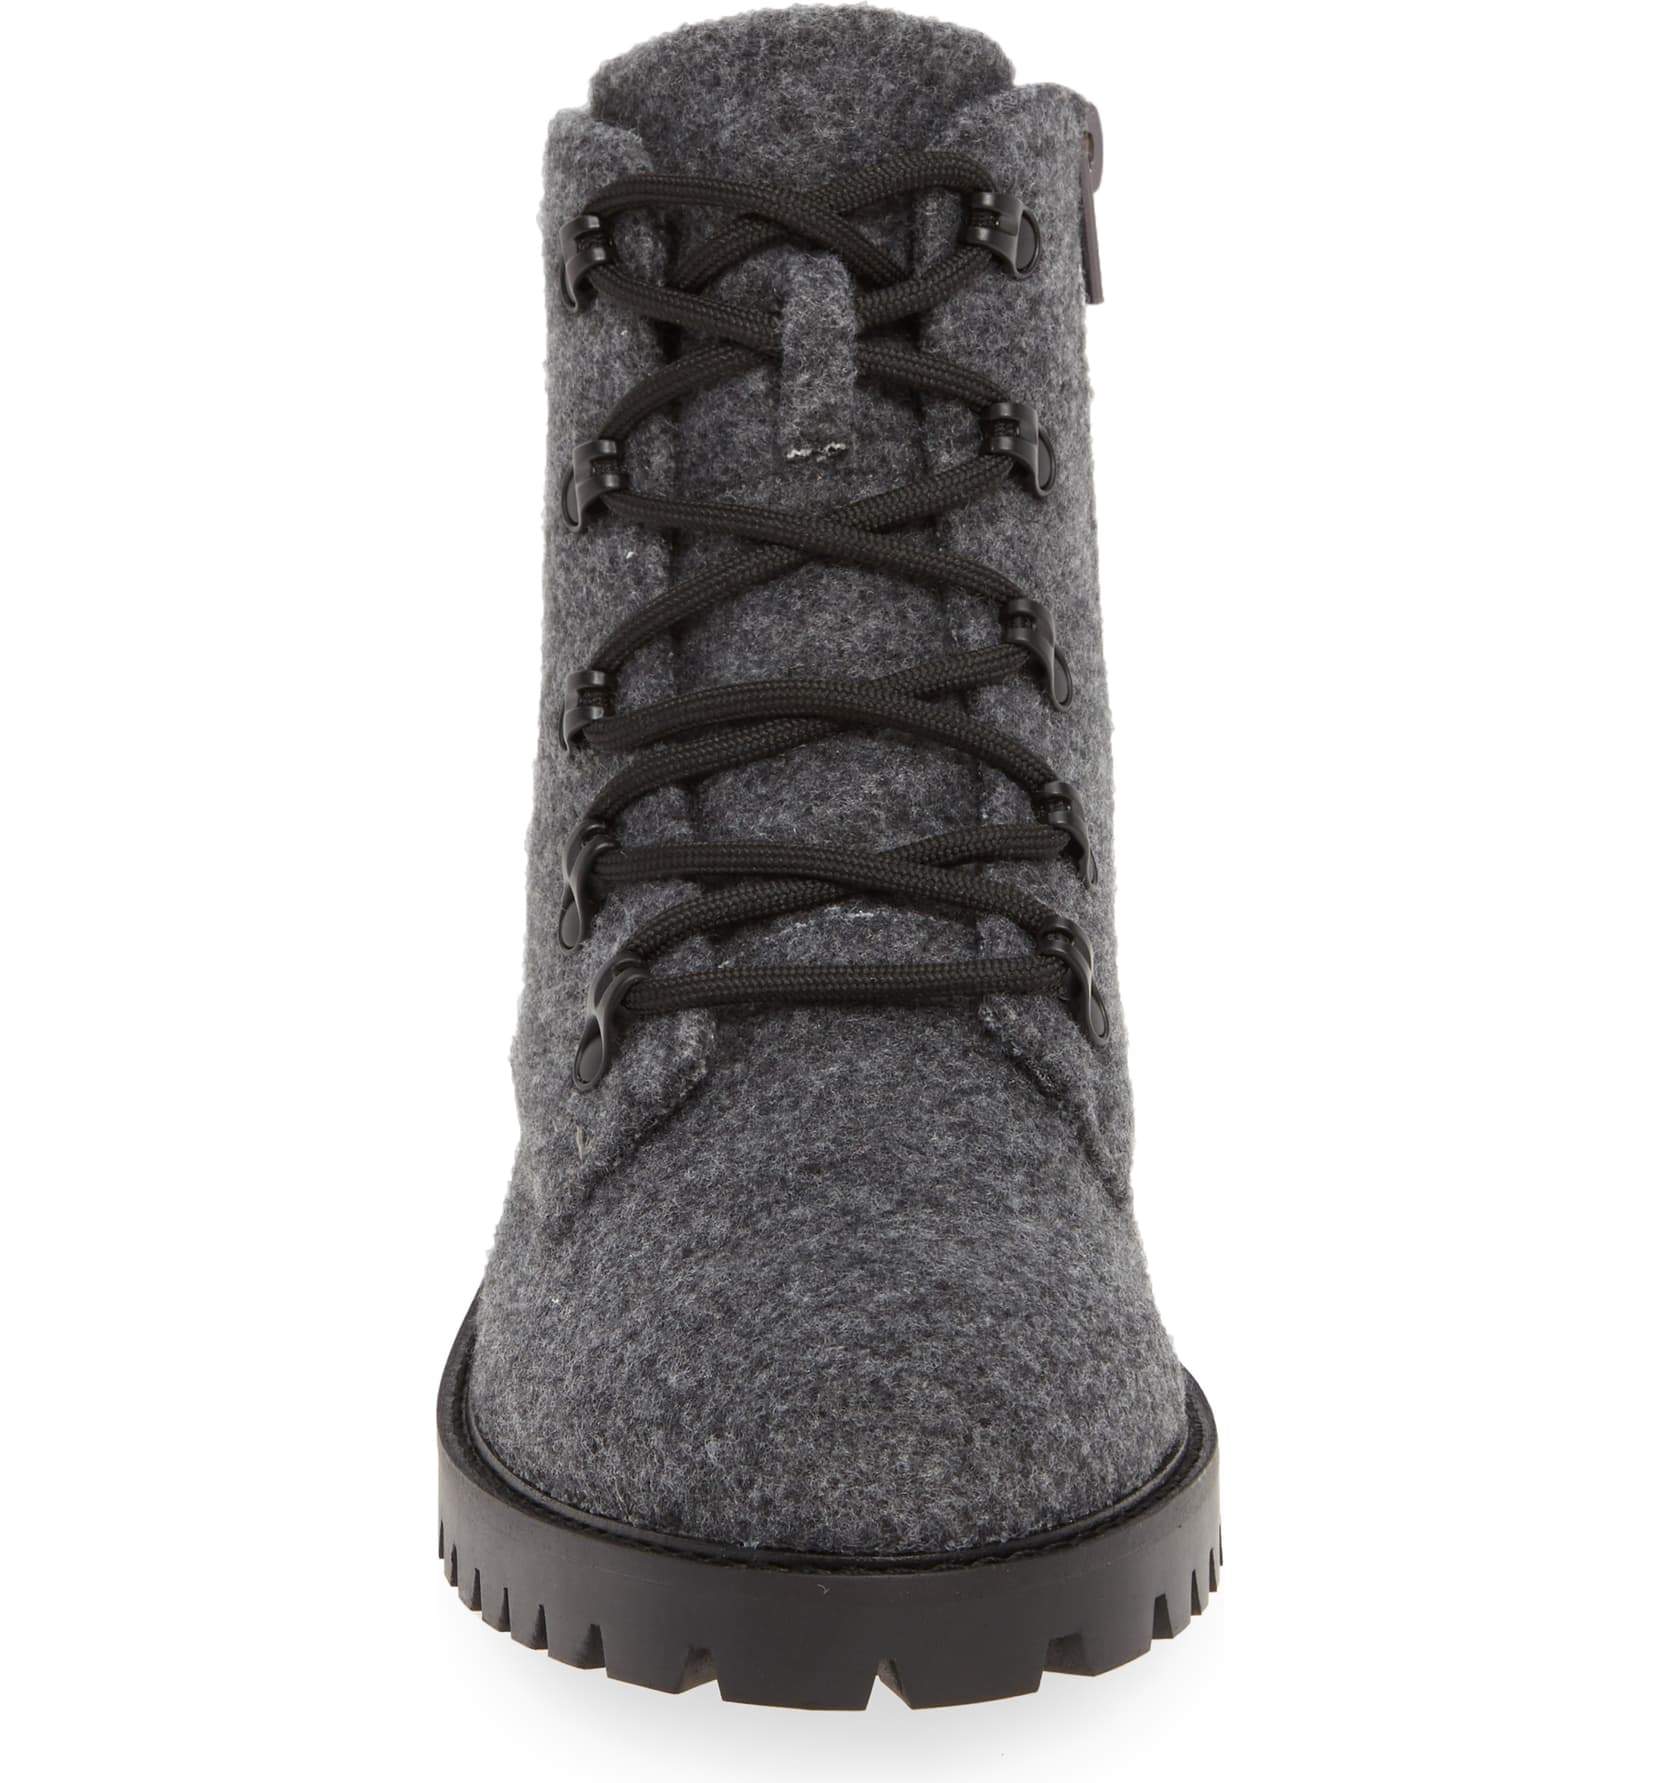 grey lace up boots